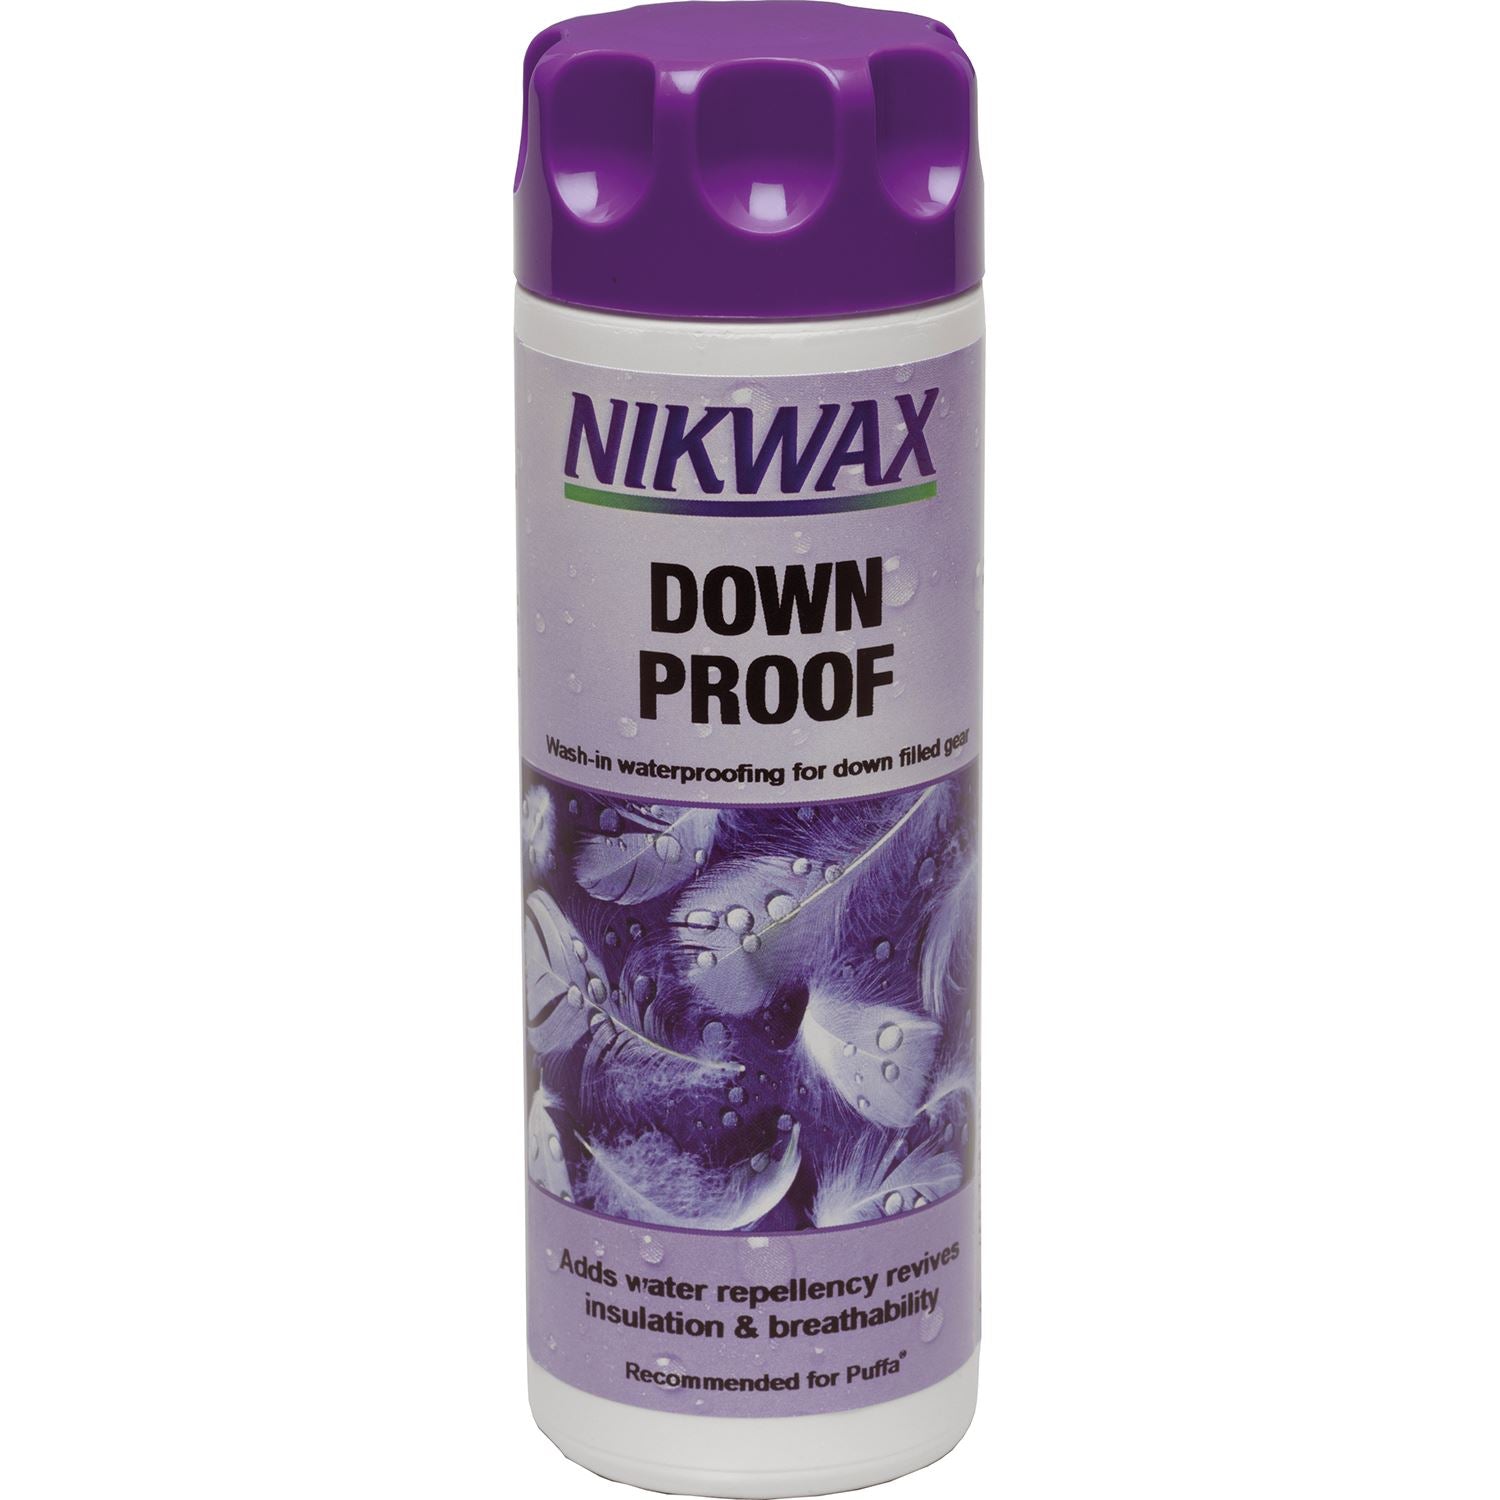 Nikwax Down Proof - Just Horse Riders